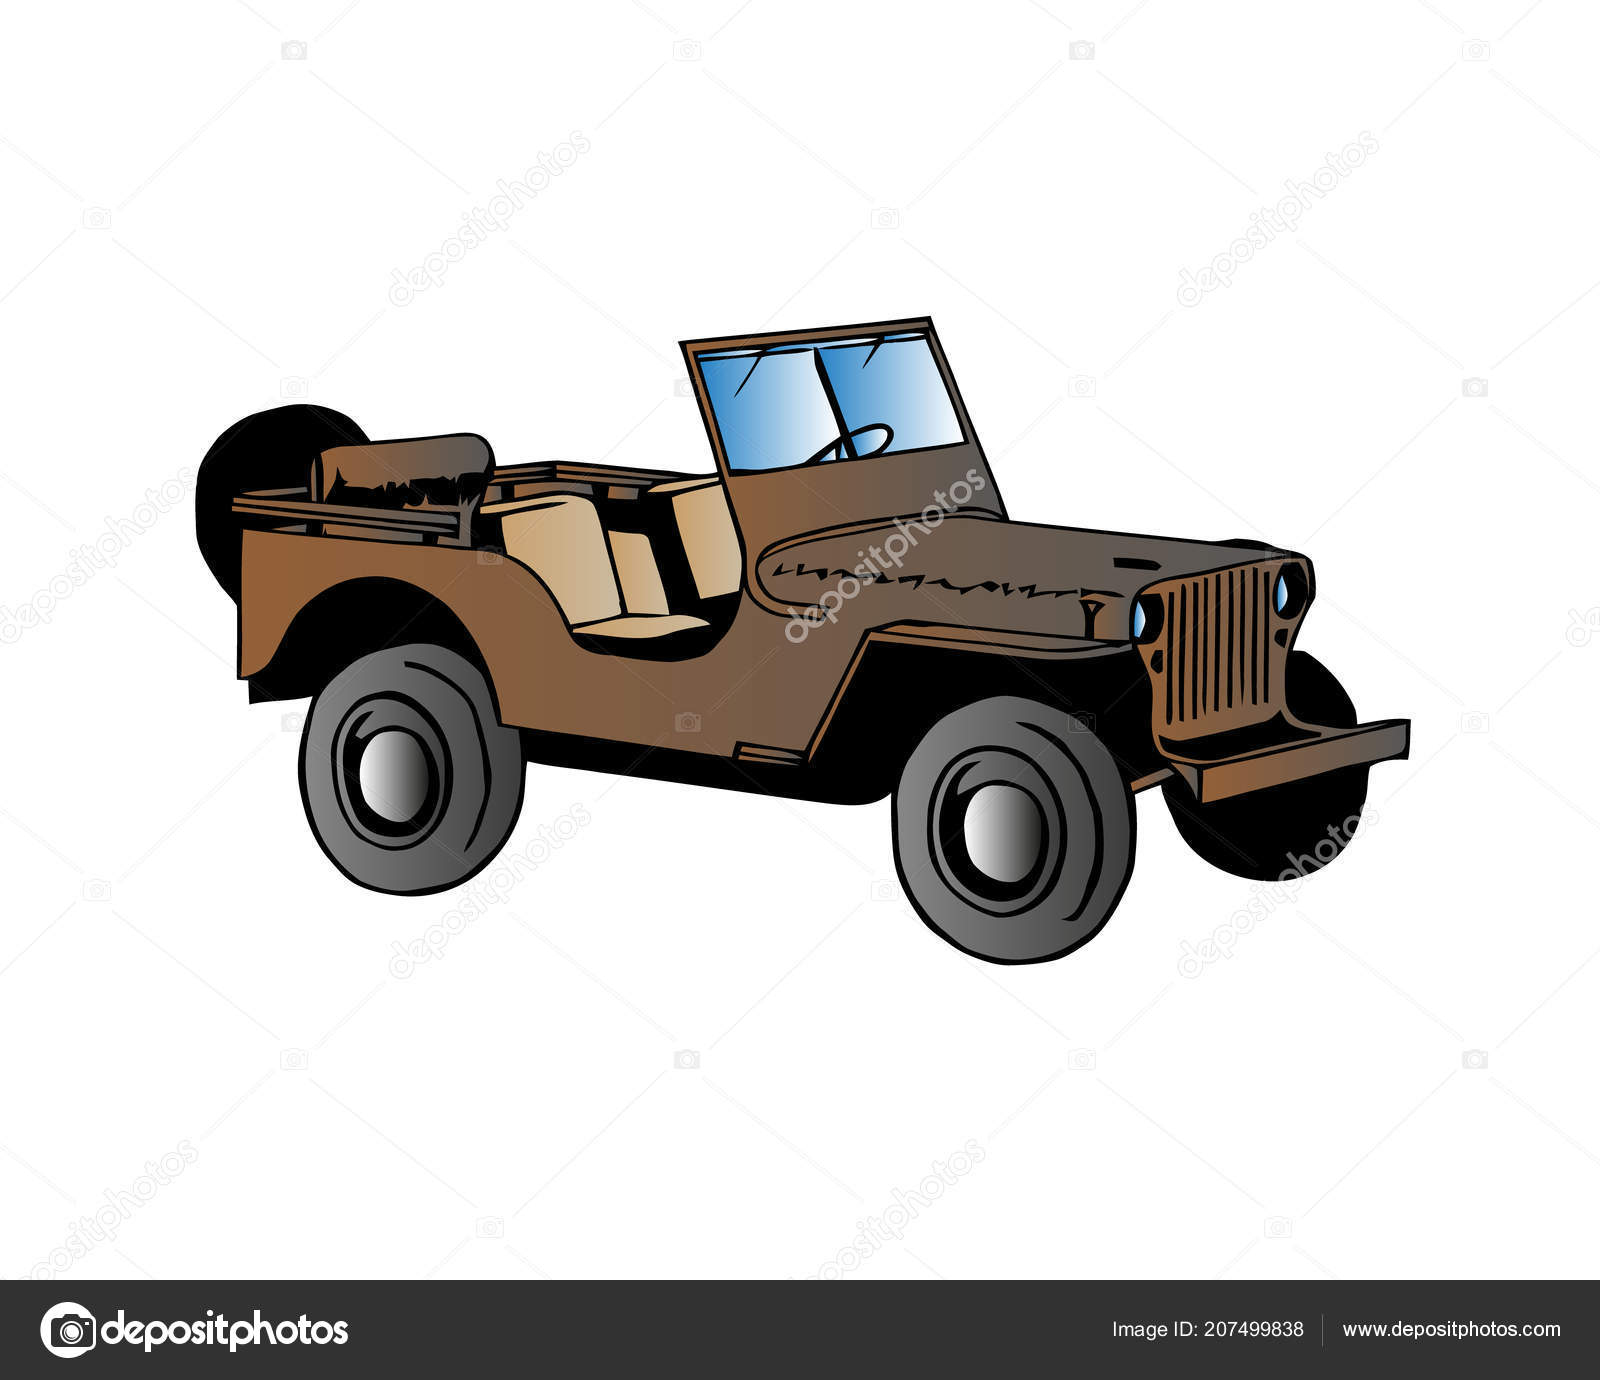 International Offroad Day - international off-road day jeep off road mud  dirt - CleanPNG / KissPNG